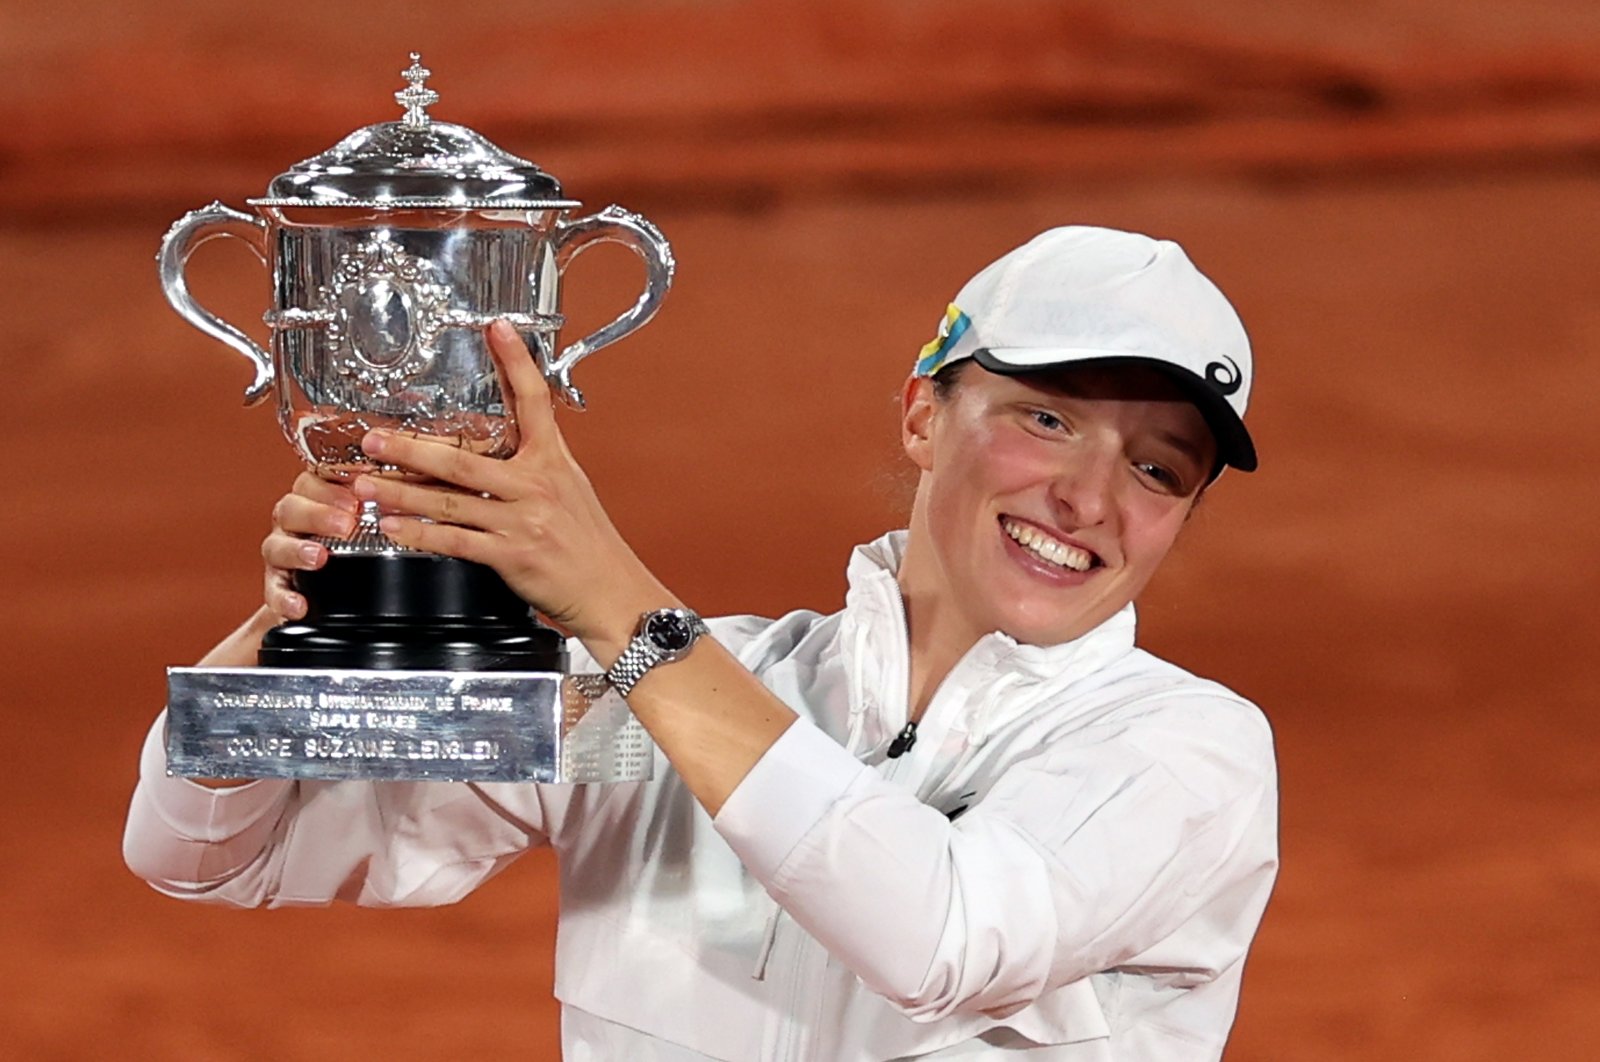 Iga Swiatek of Poland poses with her trophy after winning against Coco Gauff of the U.S. in their women&#039;s final match during the French Open tennis tournament in Paris, France, June 4, 2022. (EPA Photo)